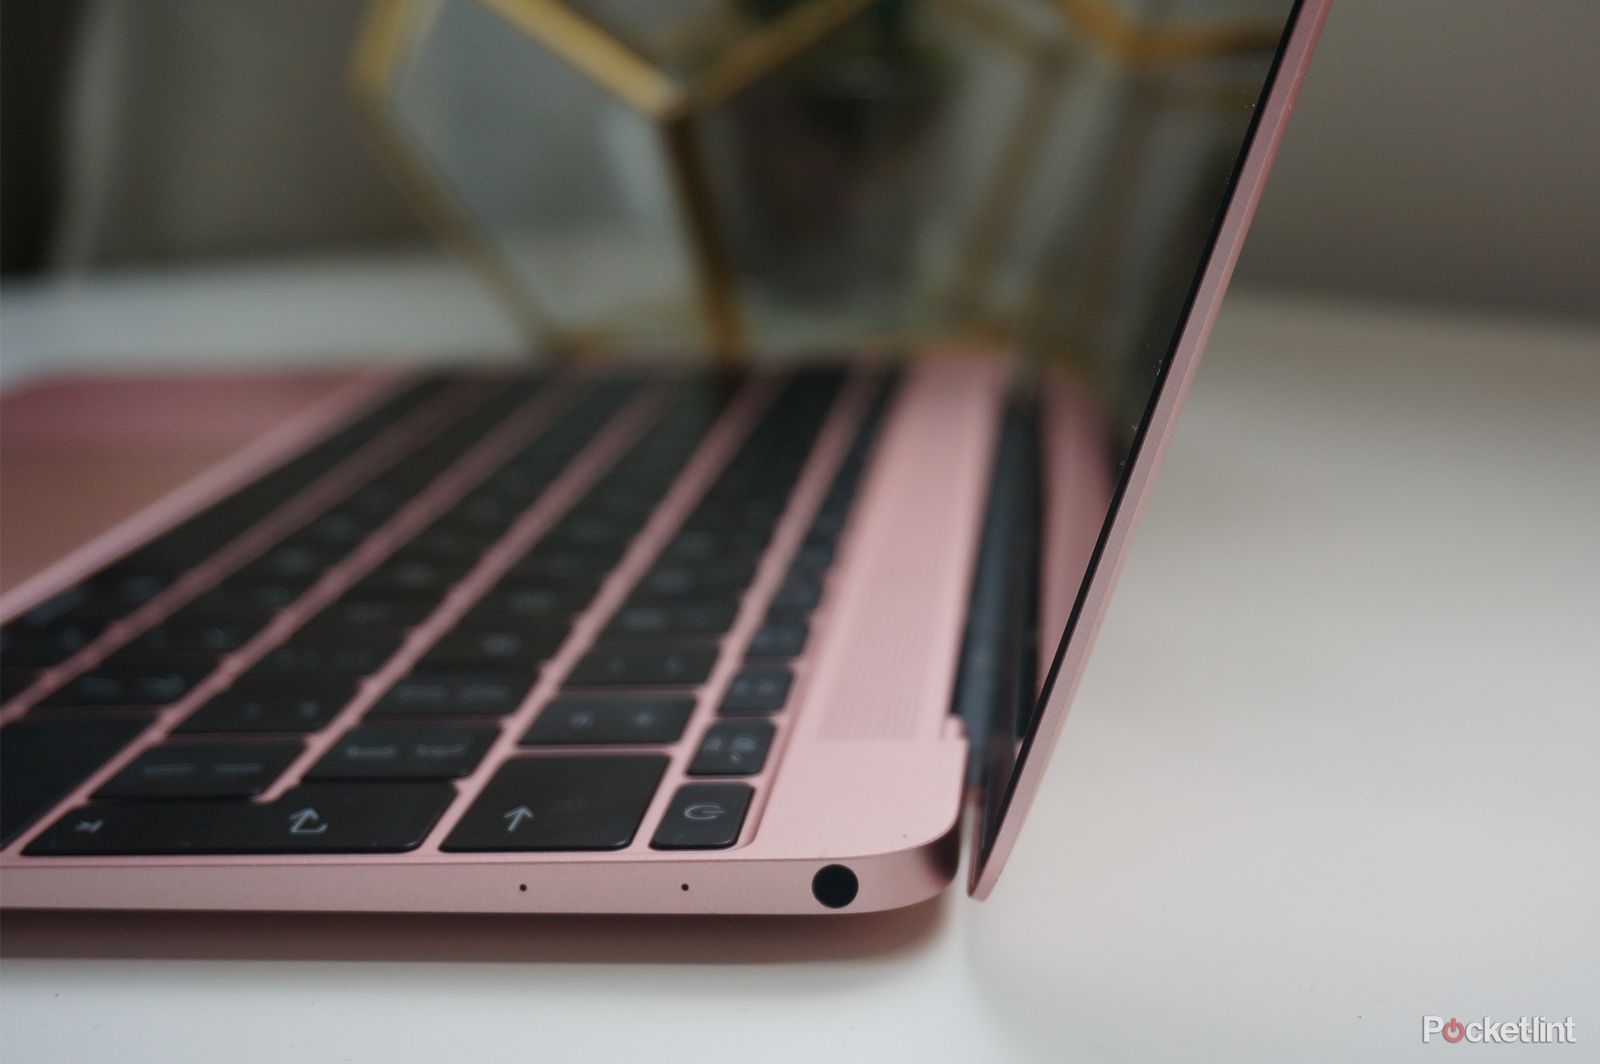 watch out apple qualcomm powered windows 10 laptops are aiming at the macbook image 1